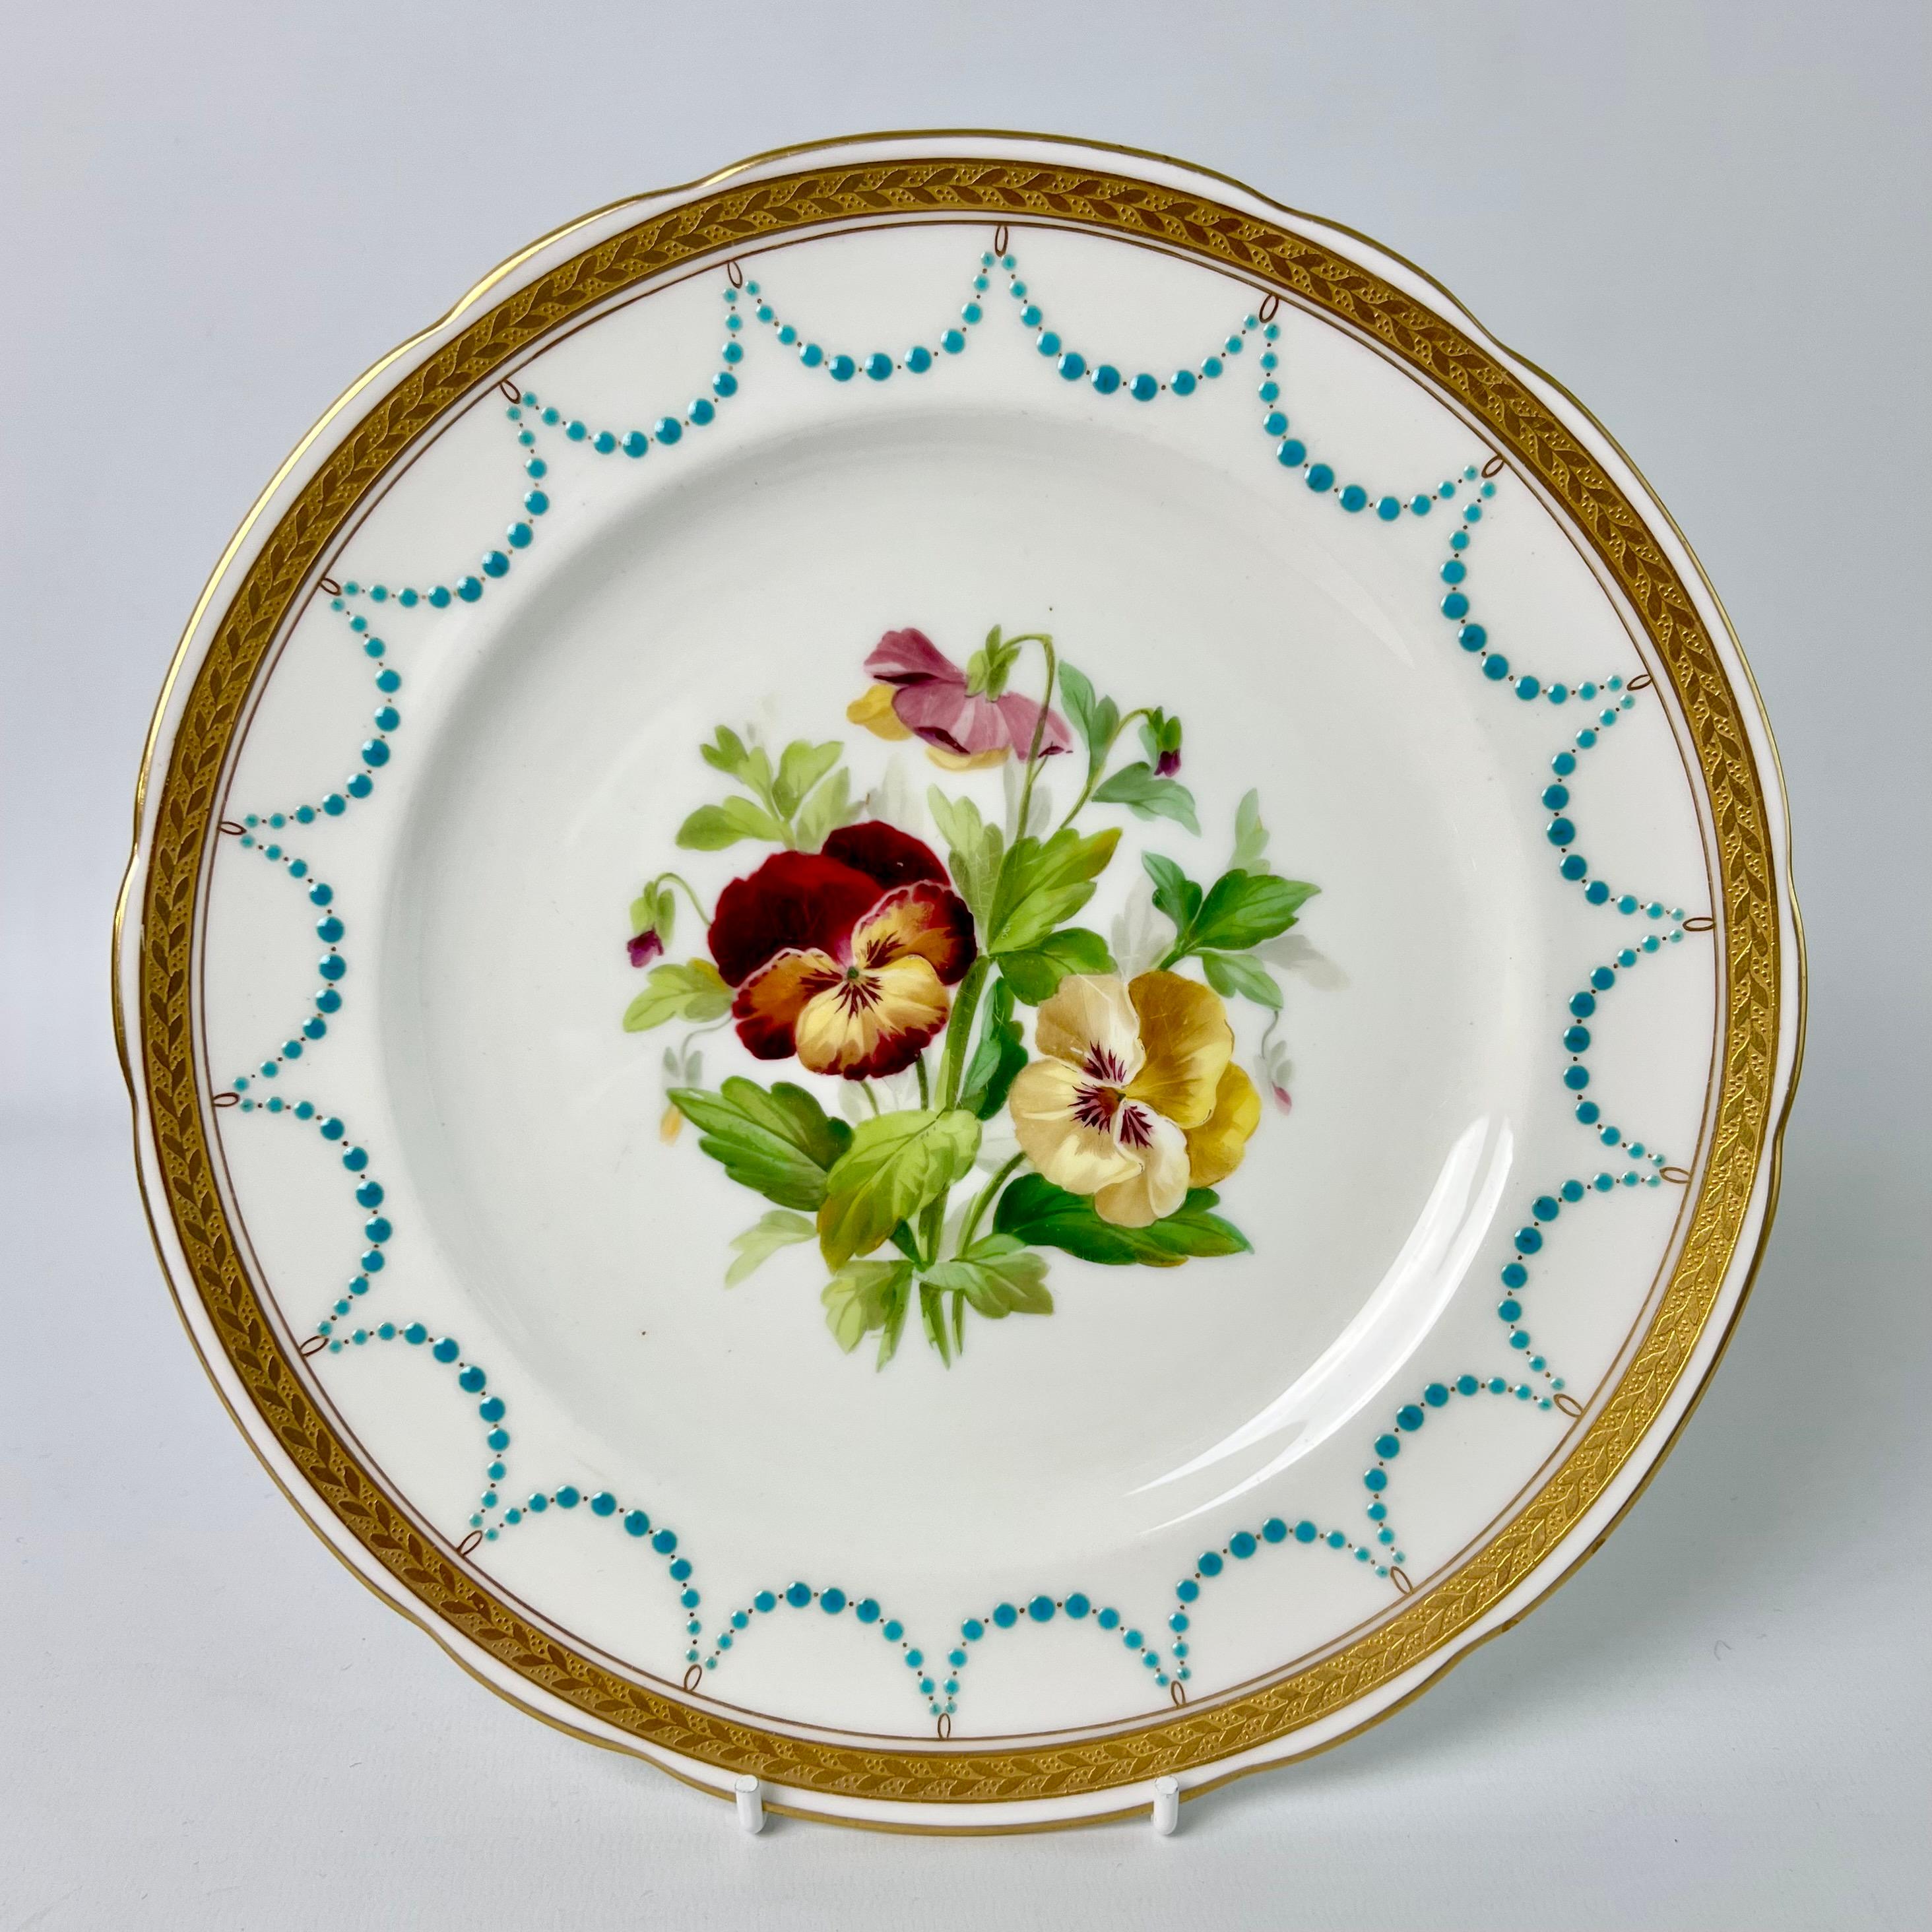 Minton Porcelain Dessert Service, Turquoise and Gilt, Flowers and Fruits, 1870 5